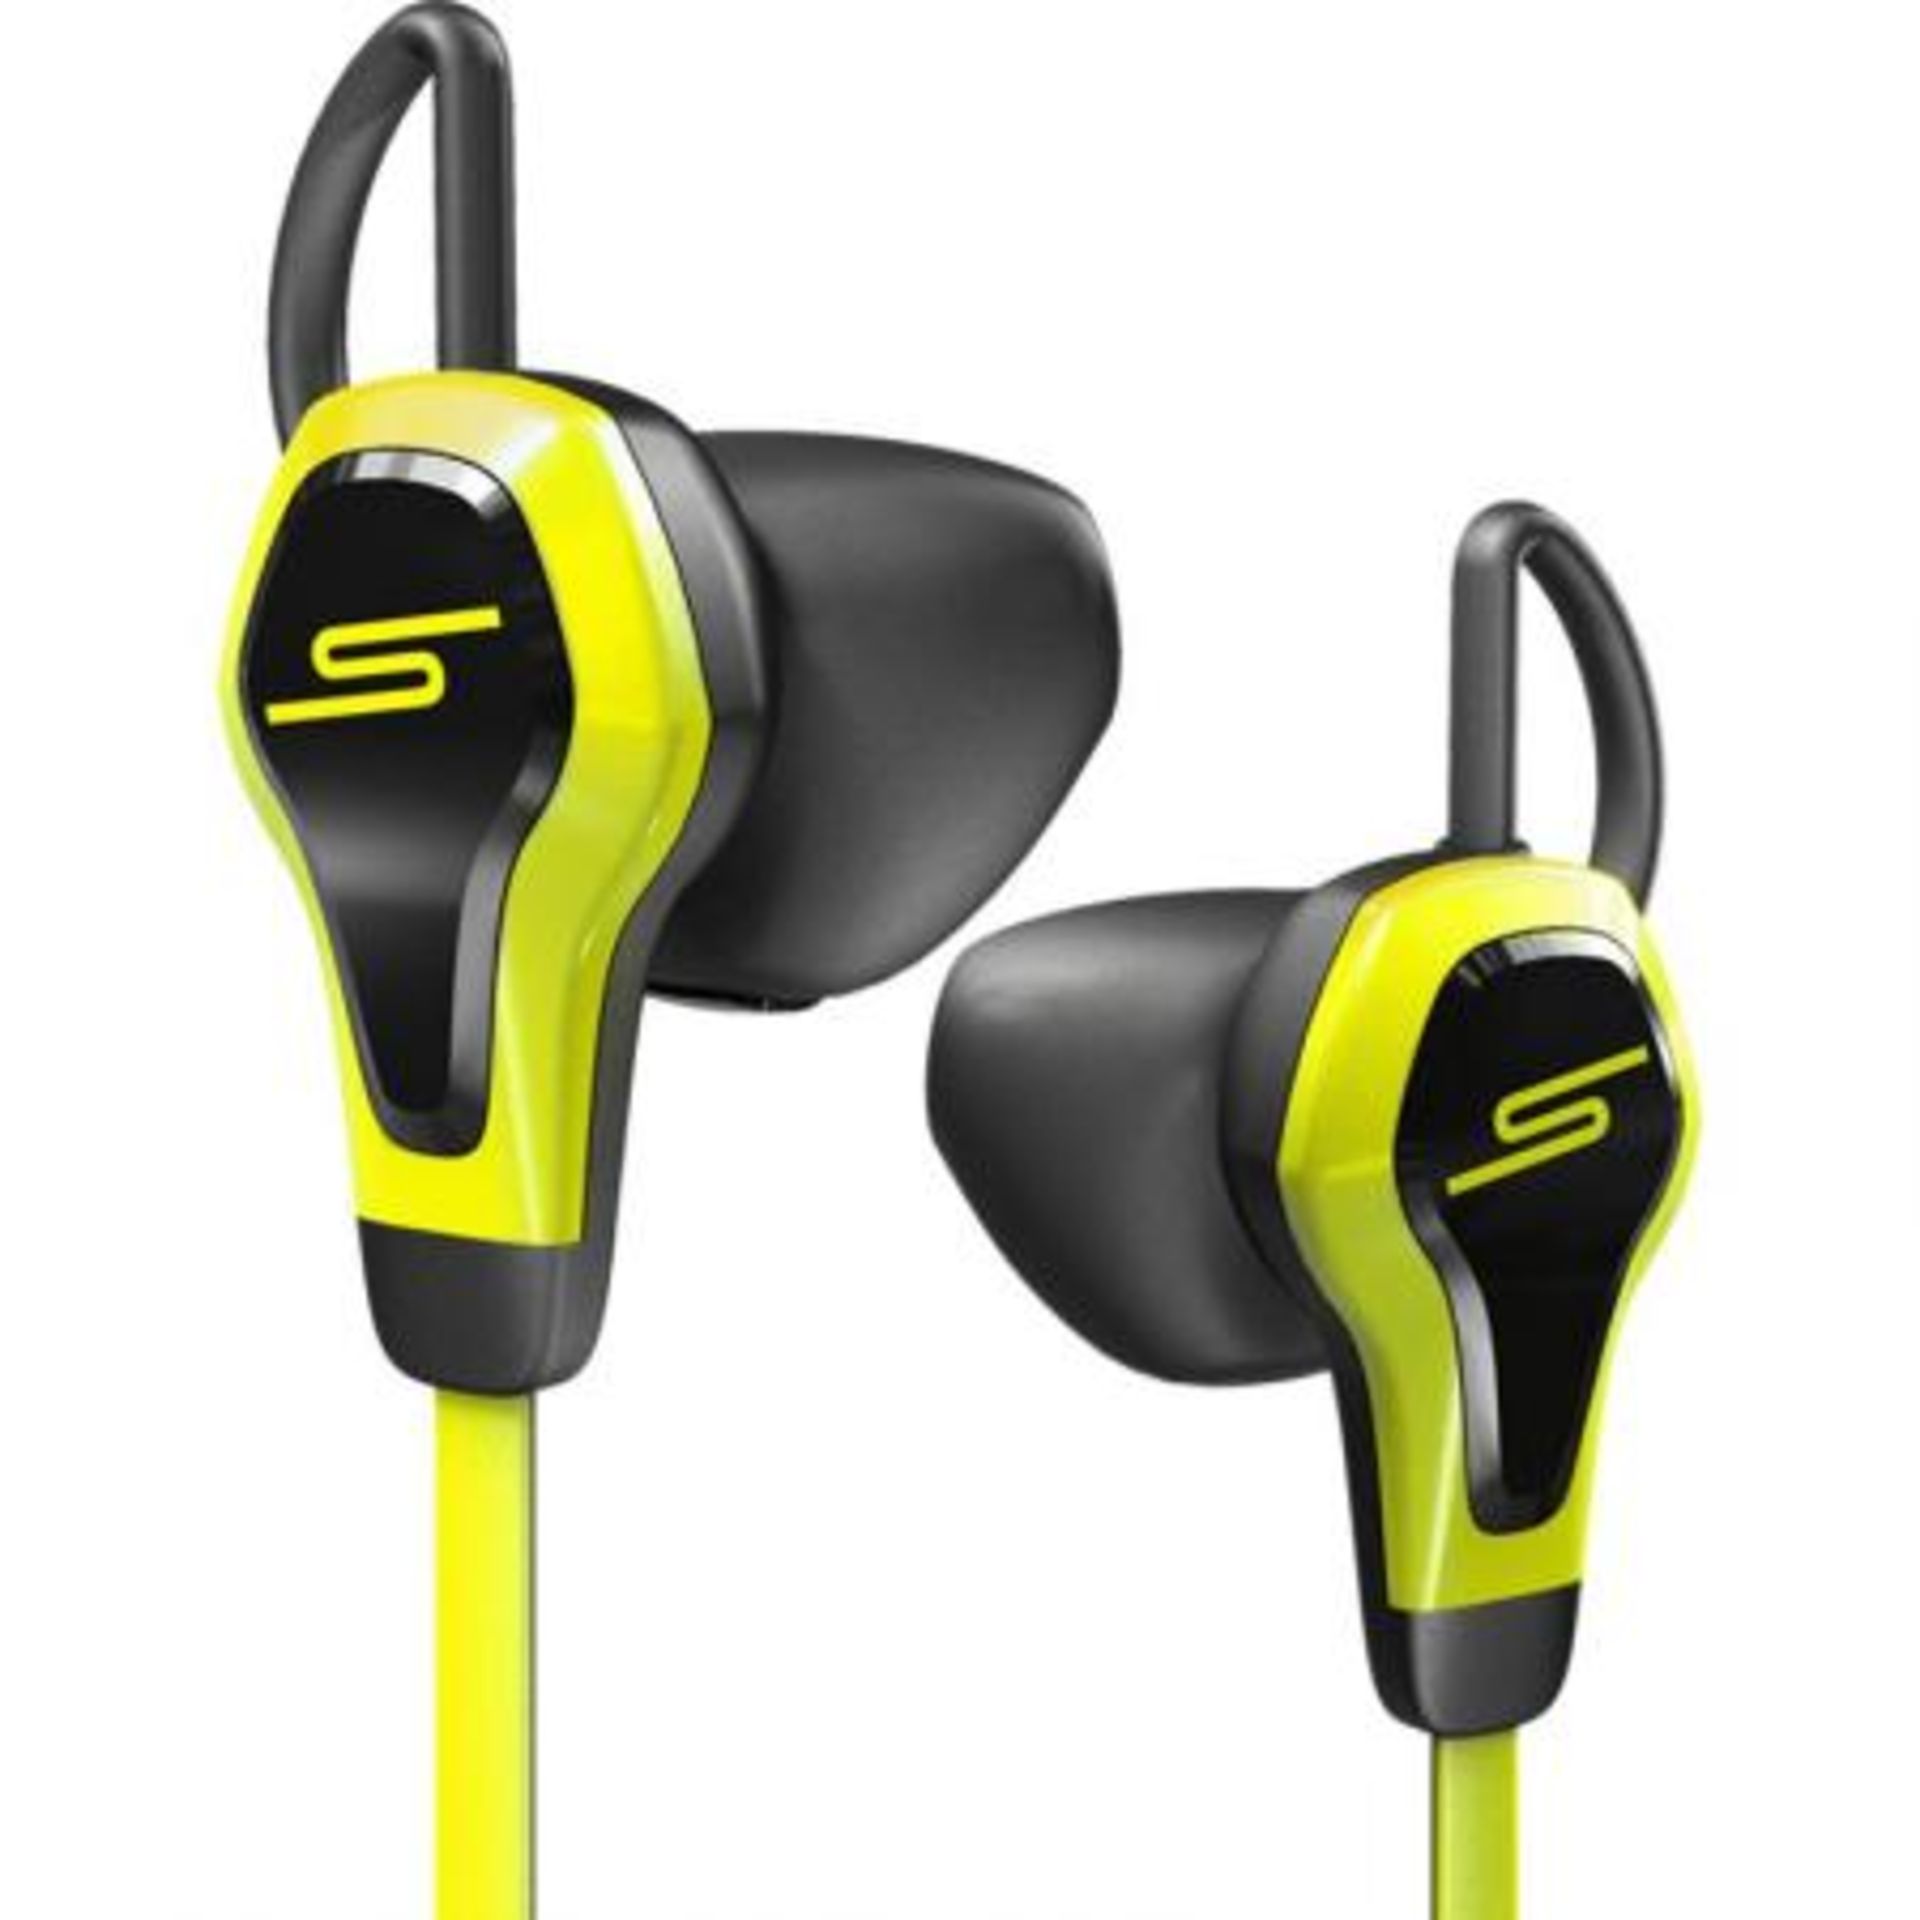 V *TRADE QTY* Brand New SMS Audio BioSport Earphones - Heart Rate Monitor Measures Changes In - Image 2 of 5